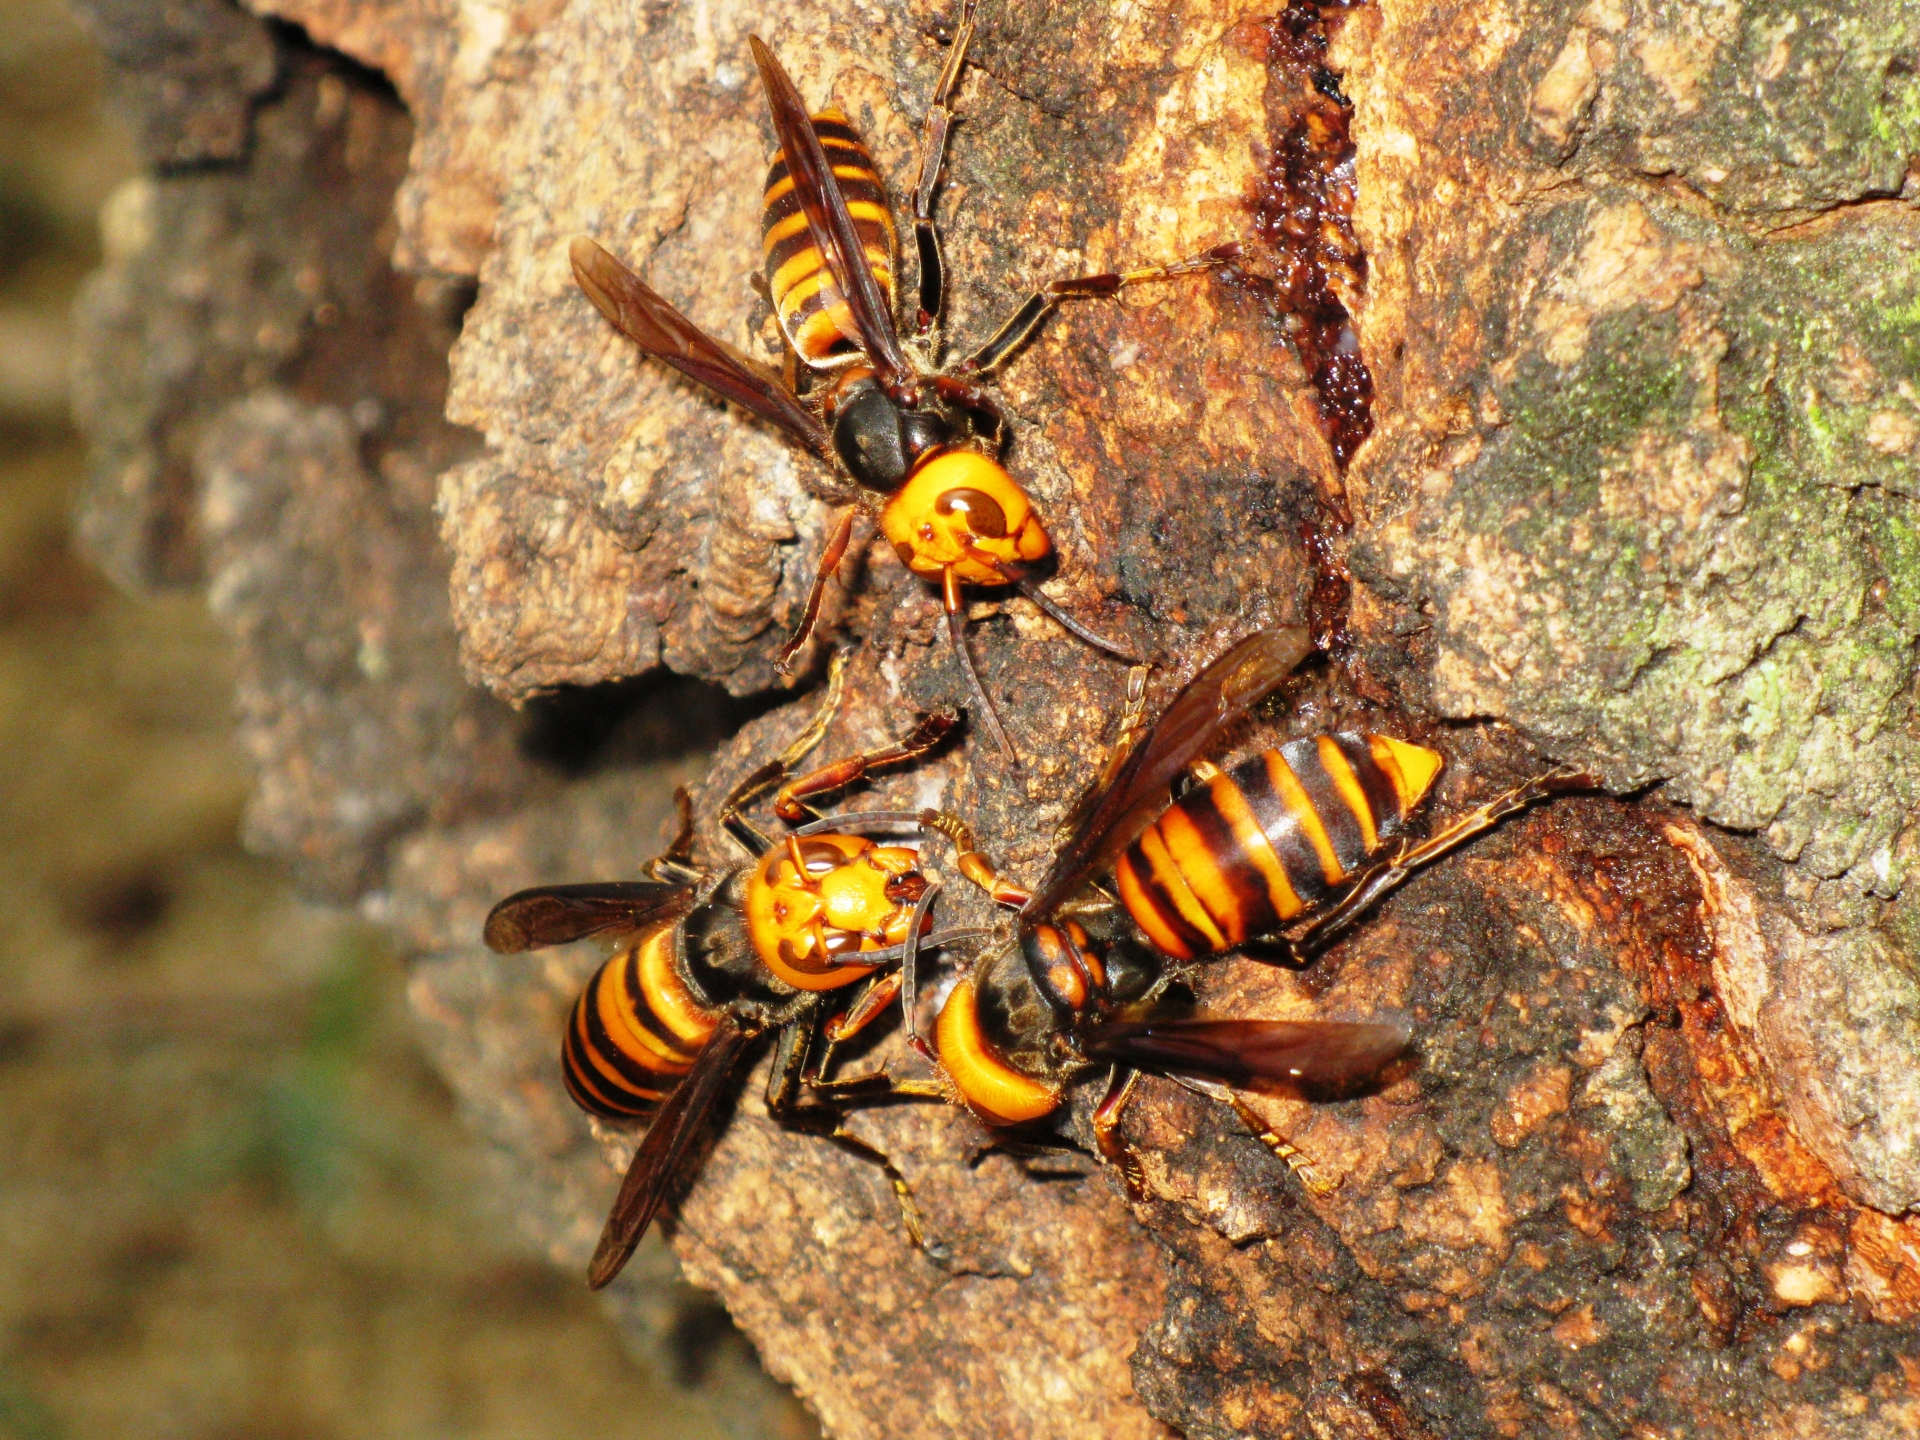 Japanese giant killer hornets stay on a tree and are sucking nectar.